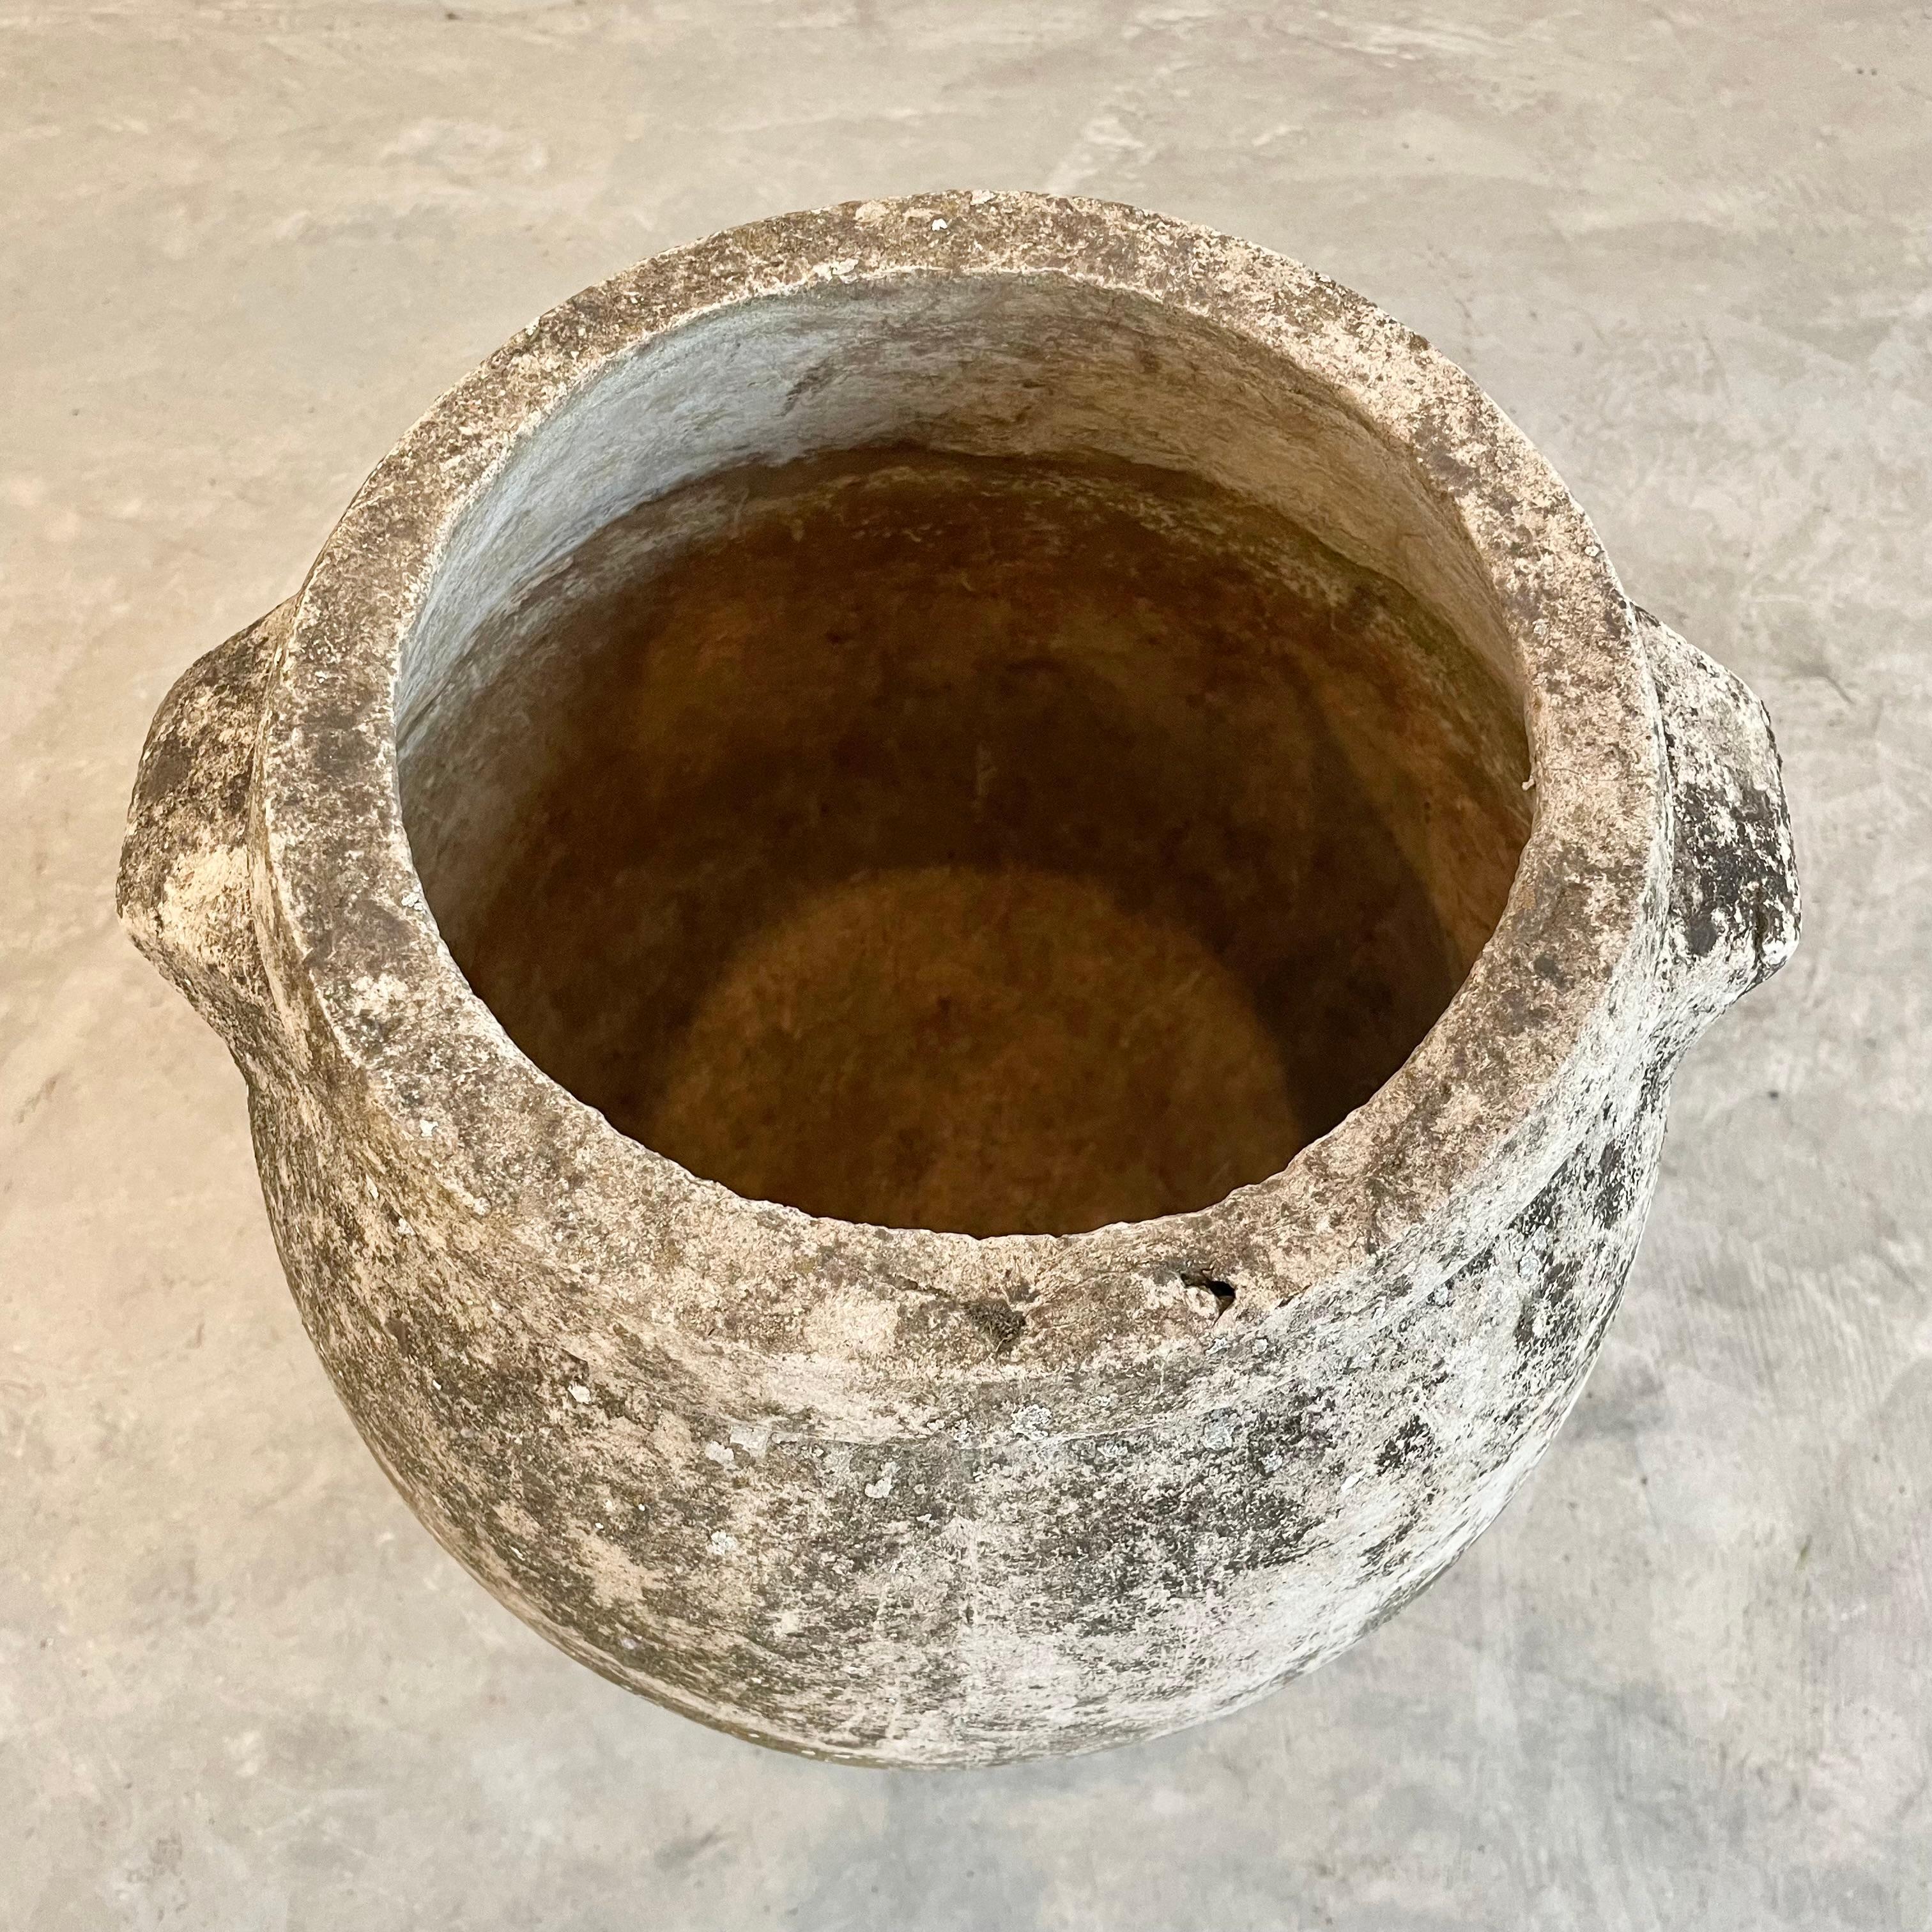 Concrete urn by Willy Guhl in a beautiful heavy patina from years of Swiss weather. Urn has a delicate cement ridge around the mouth and two handles right under the upper rim. The body of the jar tapers down to the bottom. Great vintage condition.